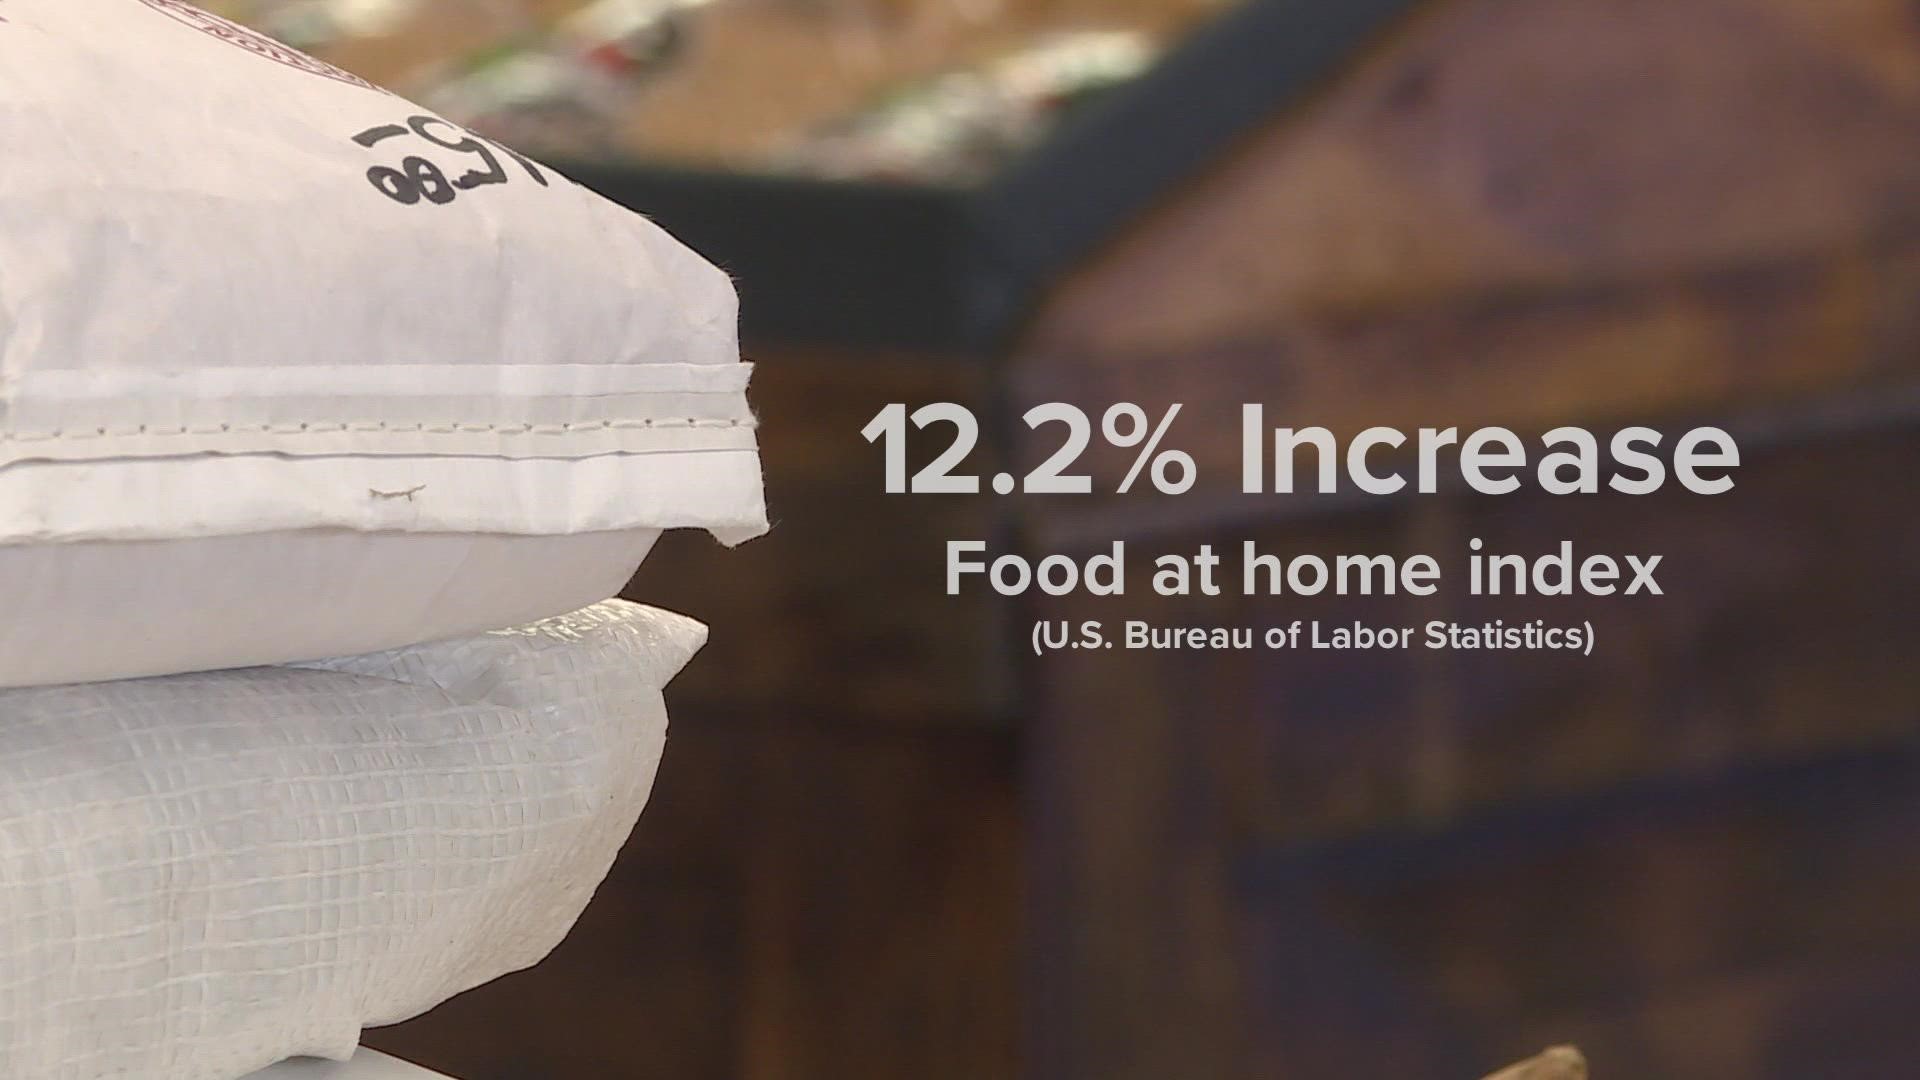 The "Food at home" index, which indicate prices of groceries, went up 12.2% compared to a year ago, the U.S. Bureau of Labor Statistics reported Wednesday.